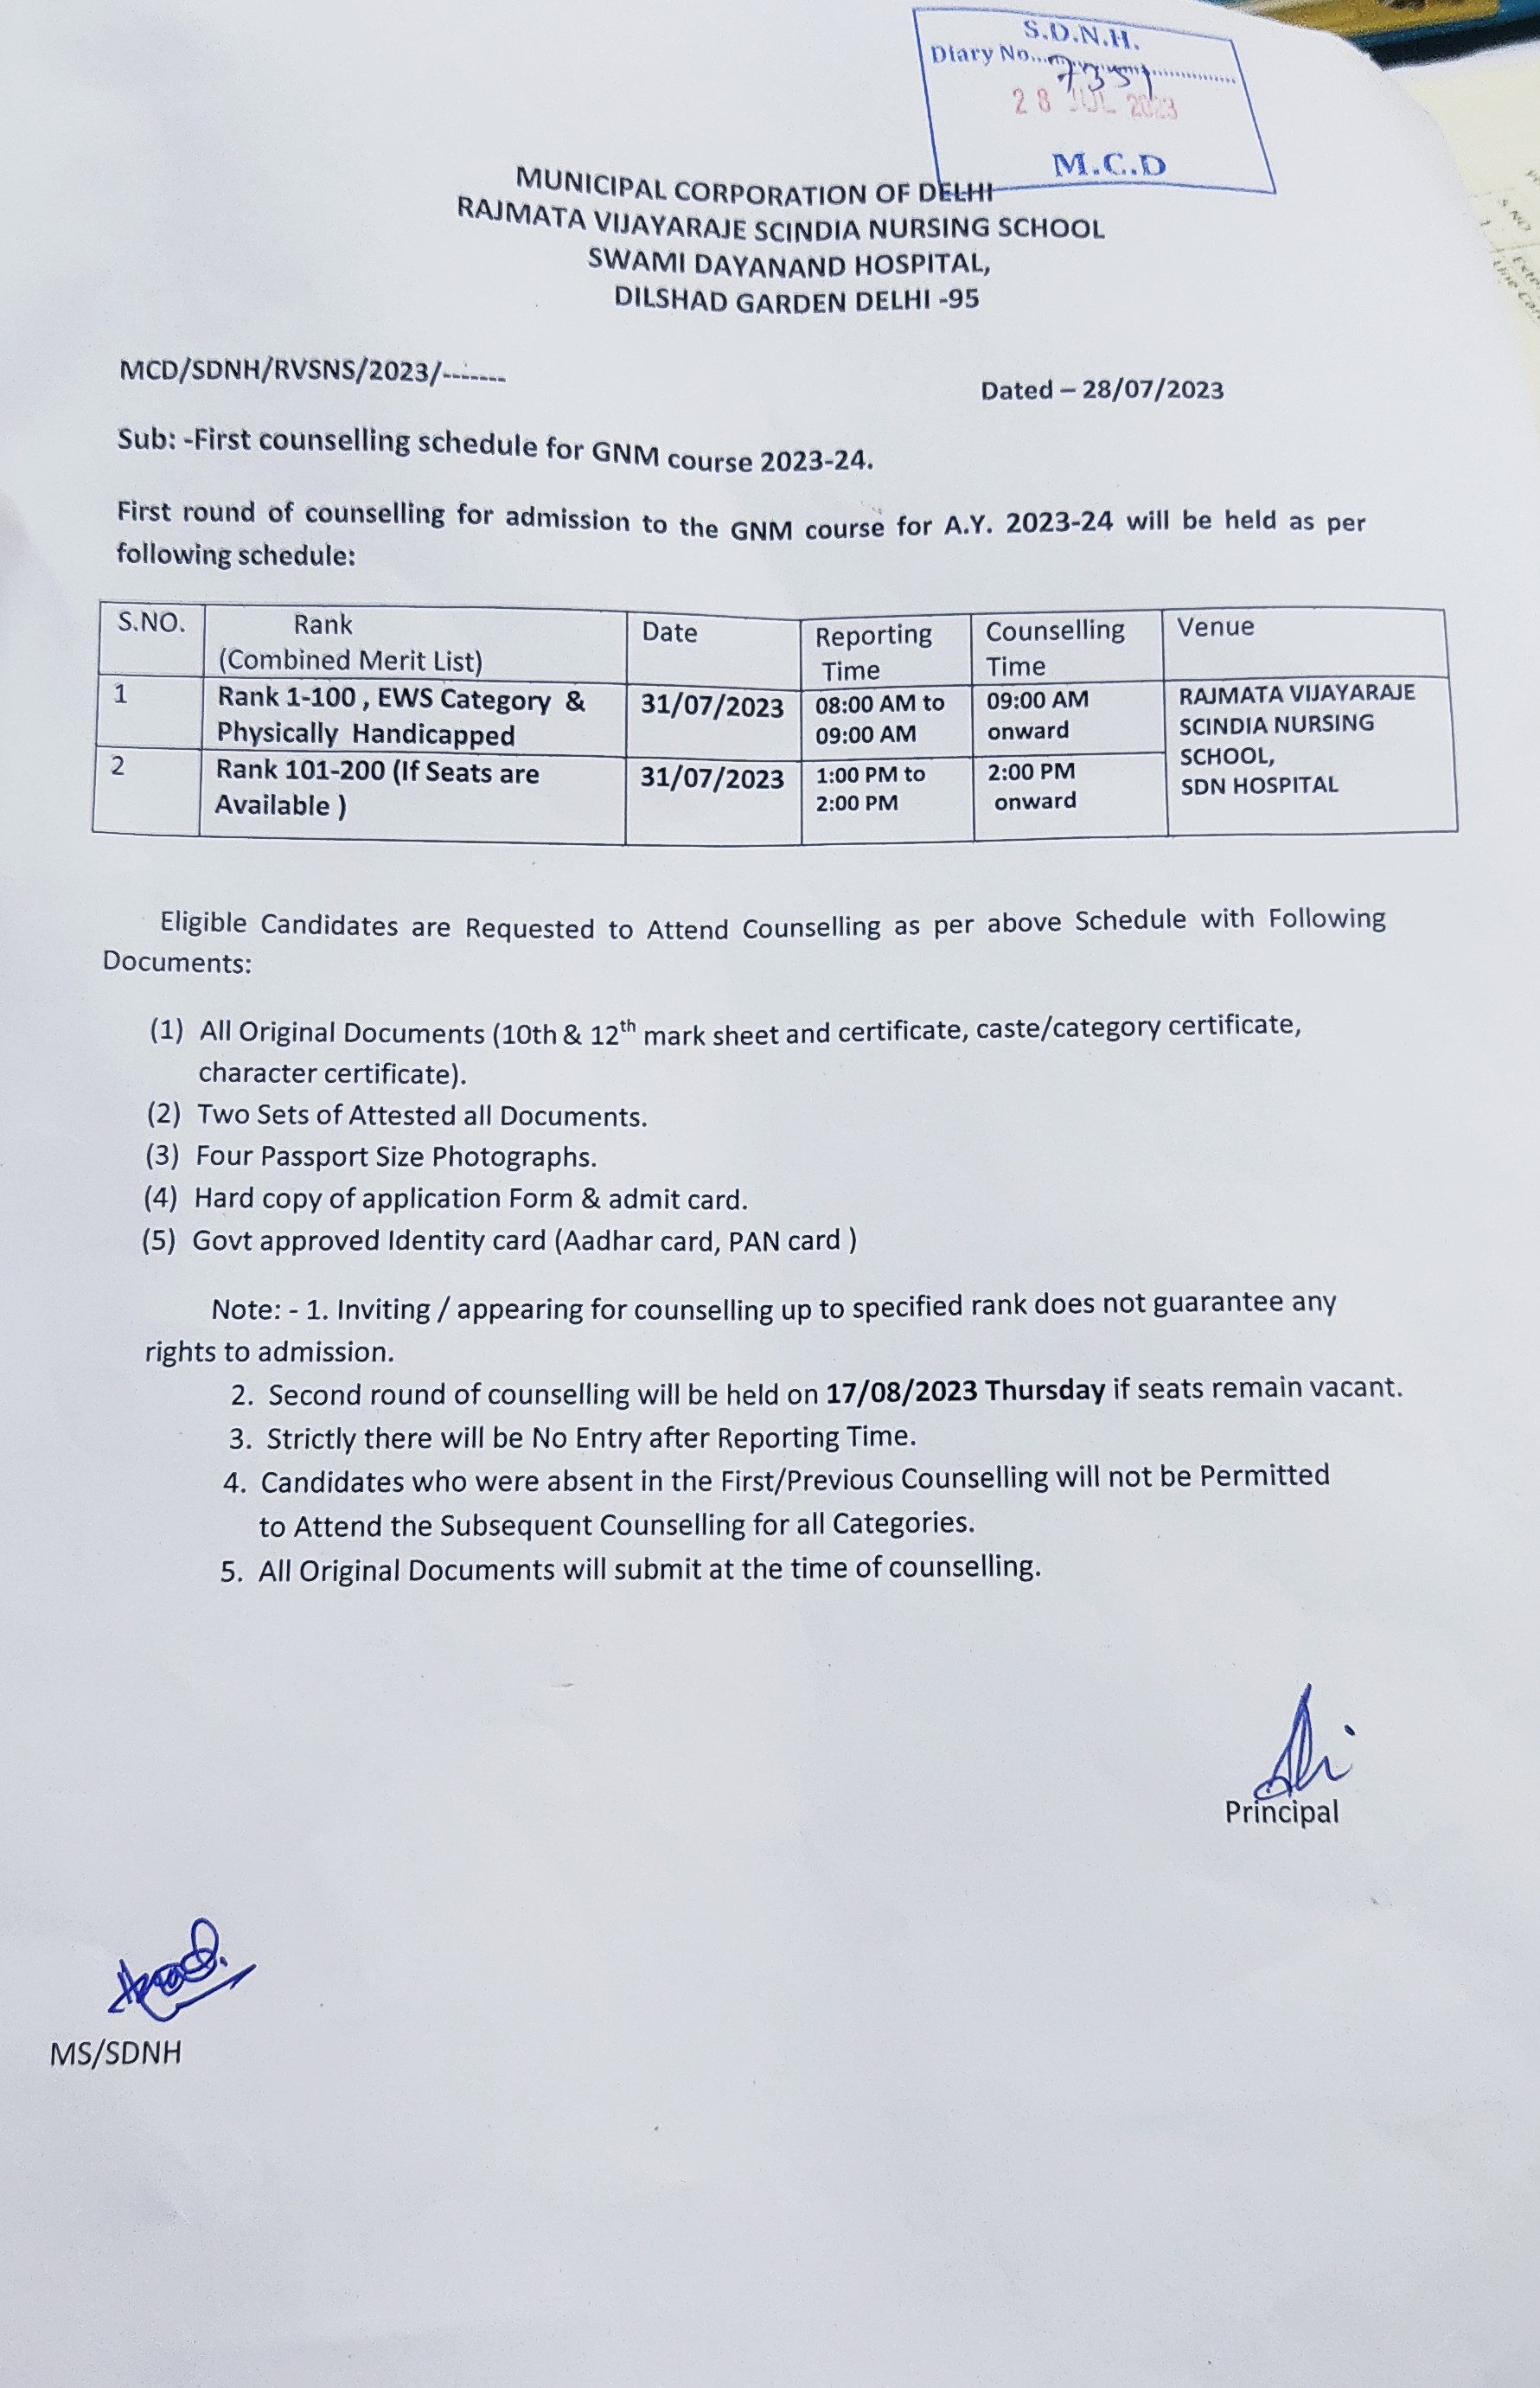 First counselling schedule for GNM course 2023-24 in SDN Hospital